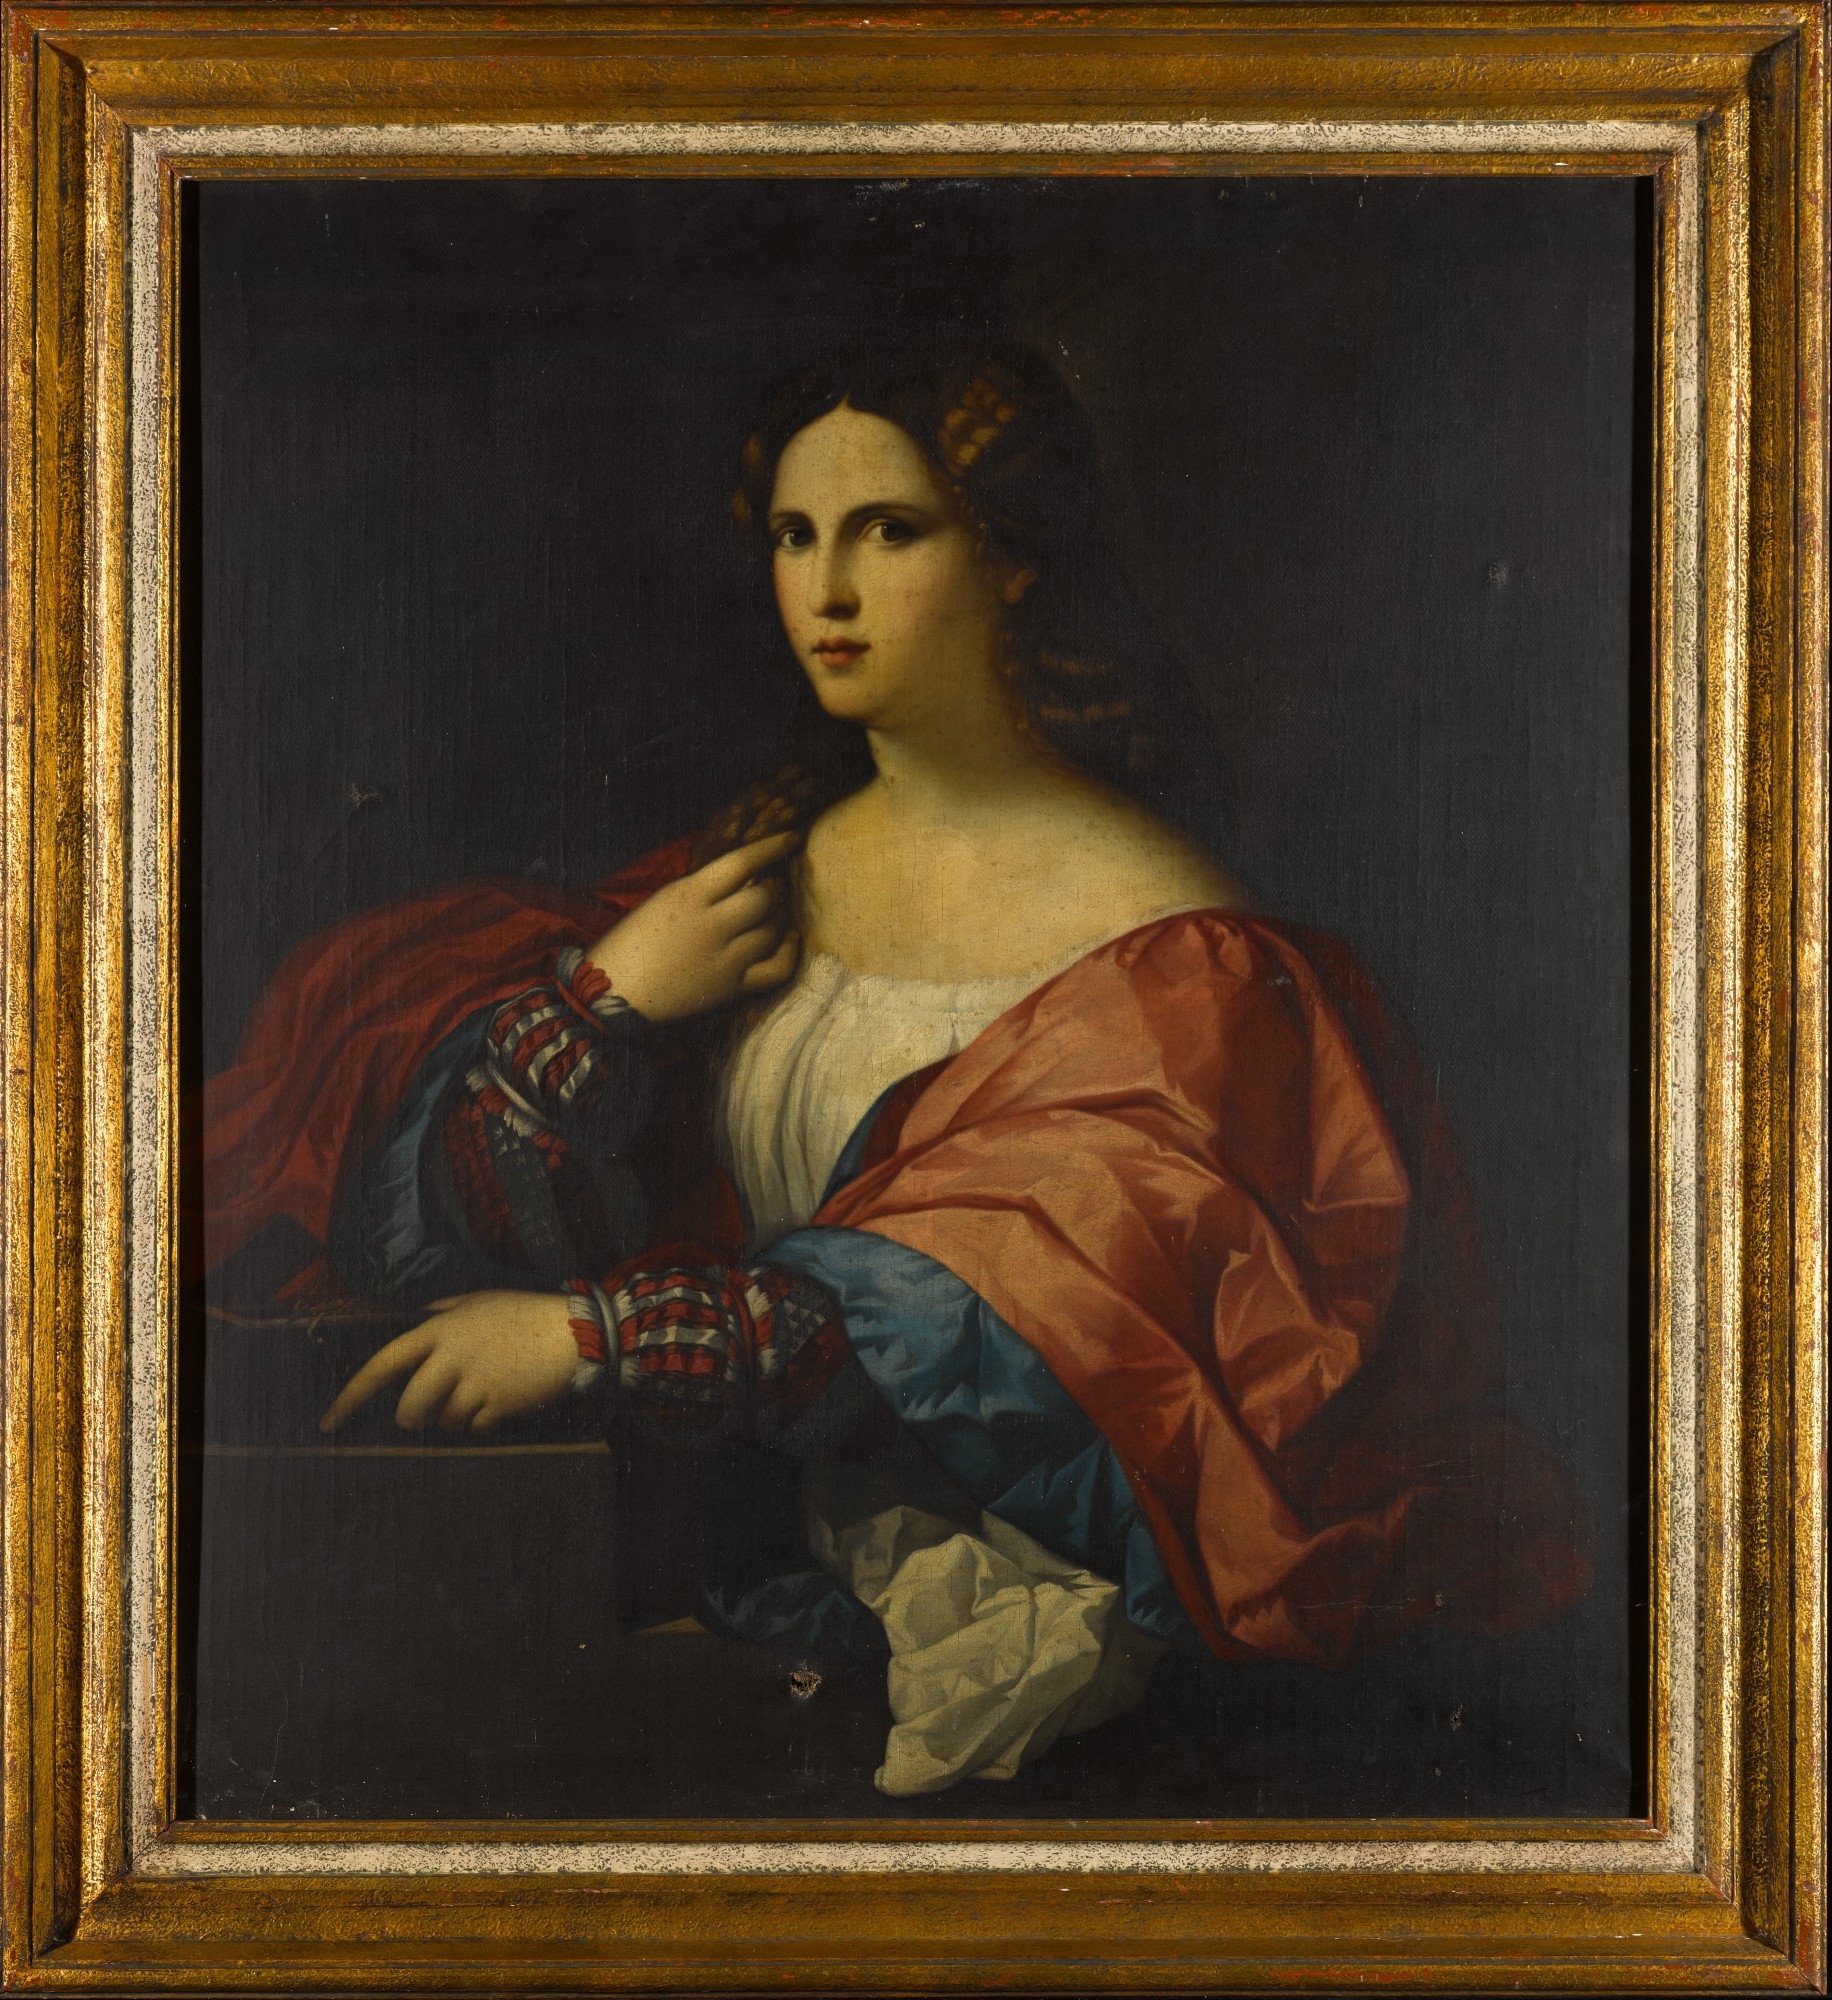 Artwork by Jacopo Palma il Vecchio, Portrait of a young woman known as 'La Bella', Made of oil on canvas